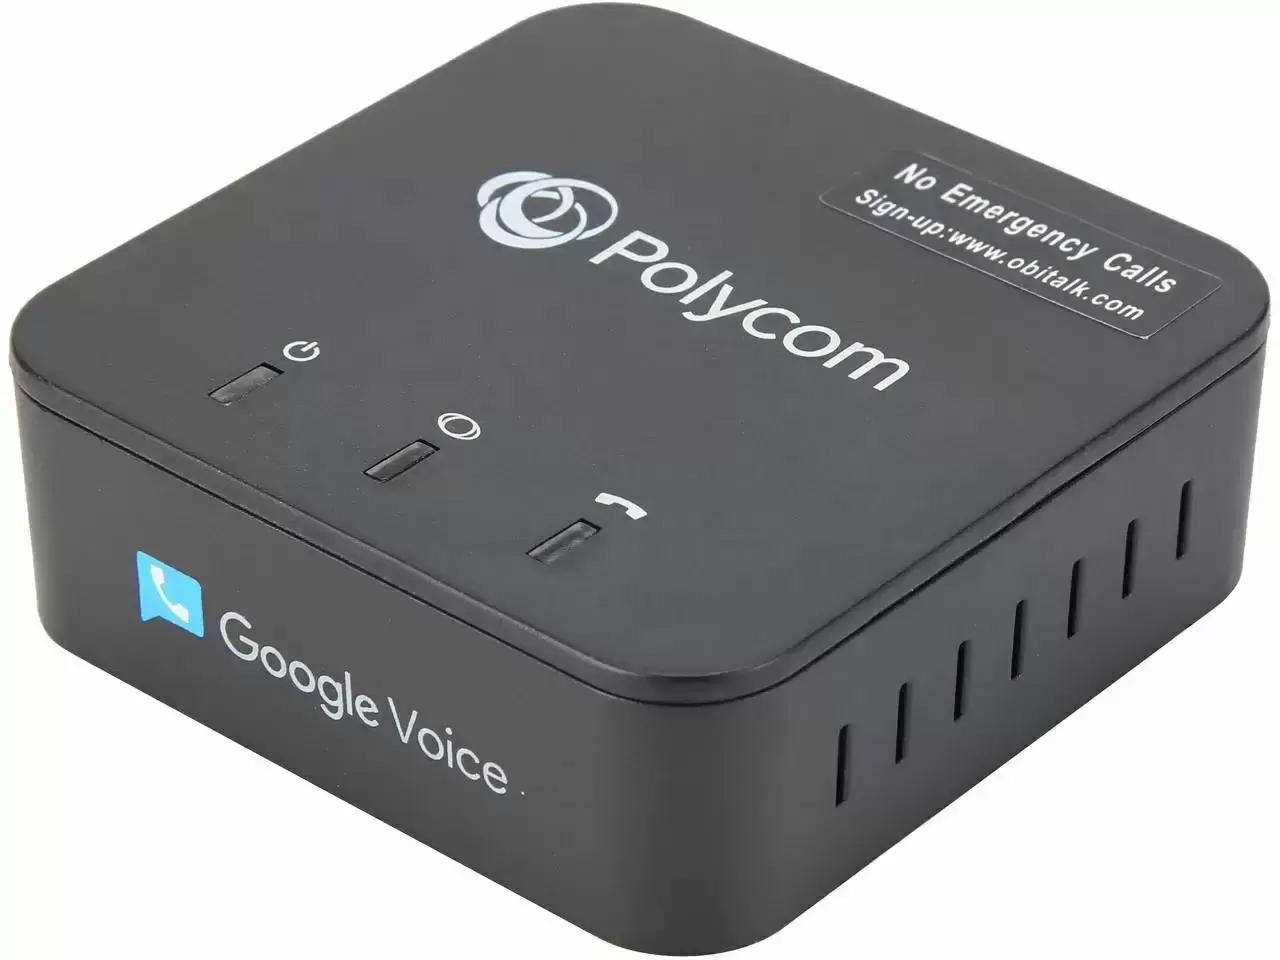 Polycom OBi200 1-Port VoIP Adapter with Google Voice for $39.99 Shipped